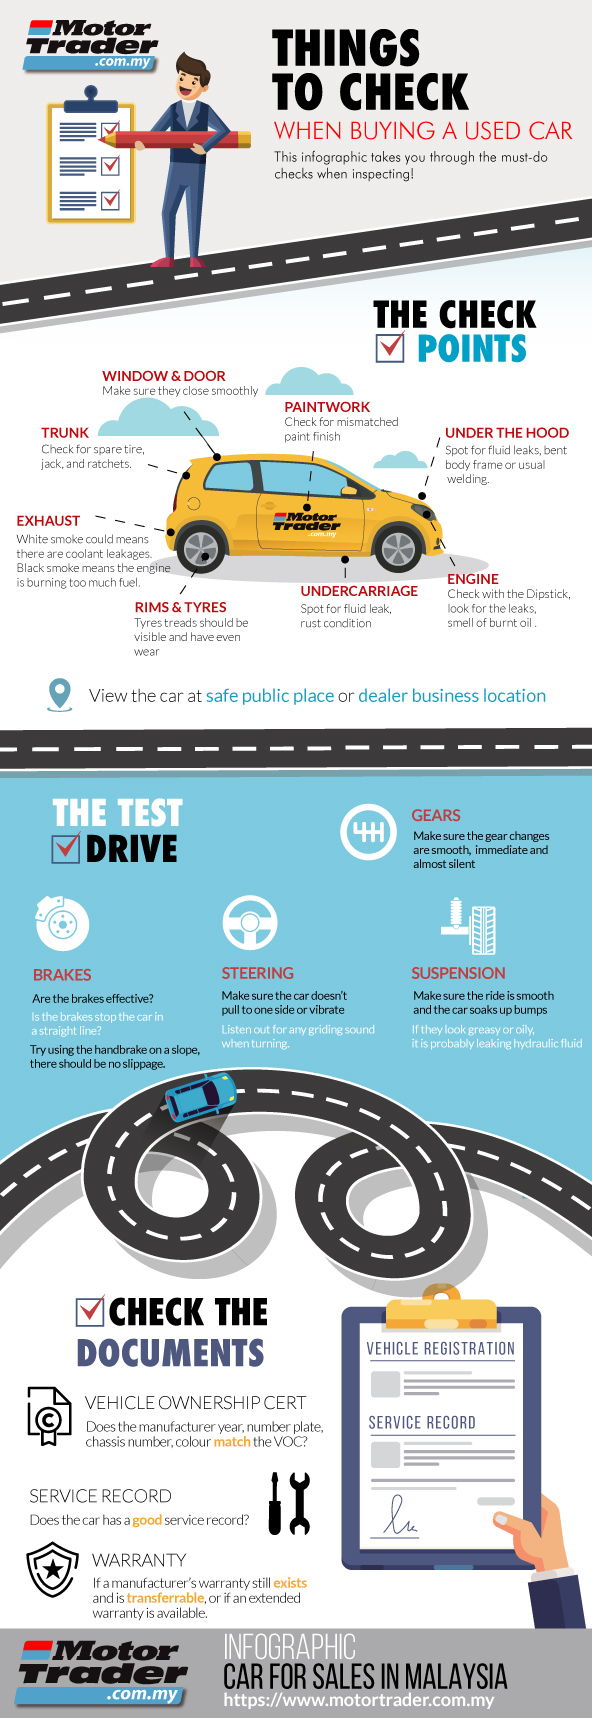 Things to check when inspecting a used car infographic